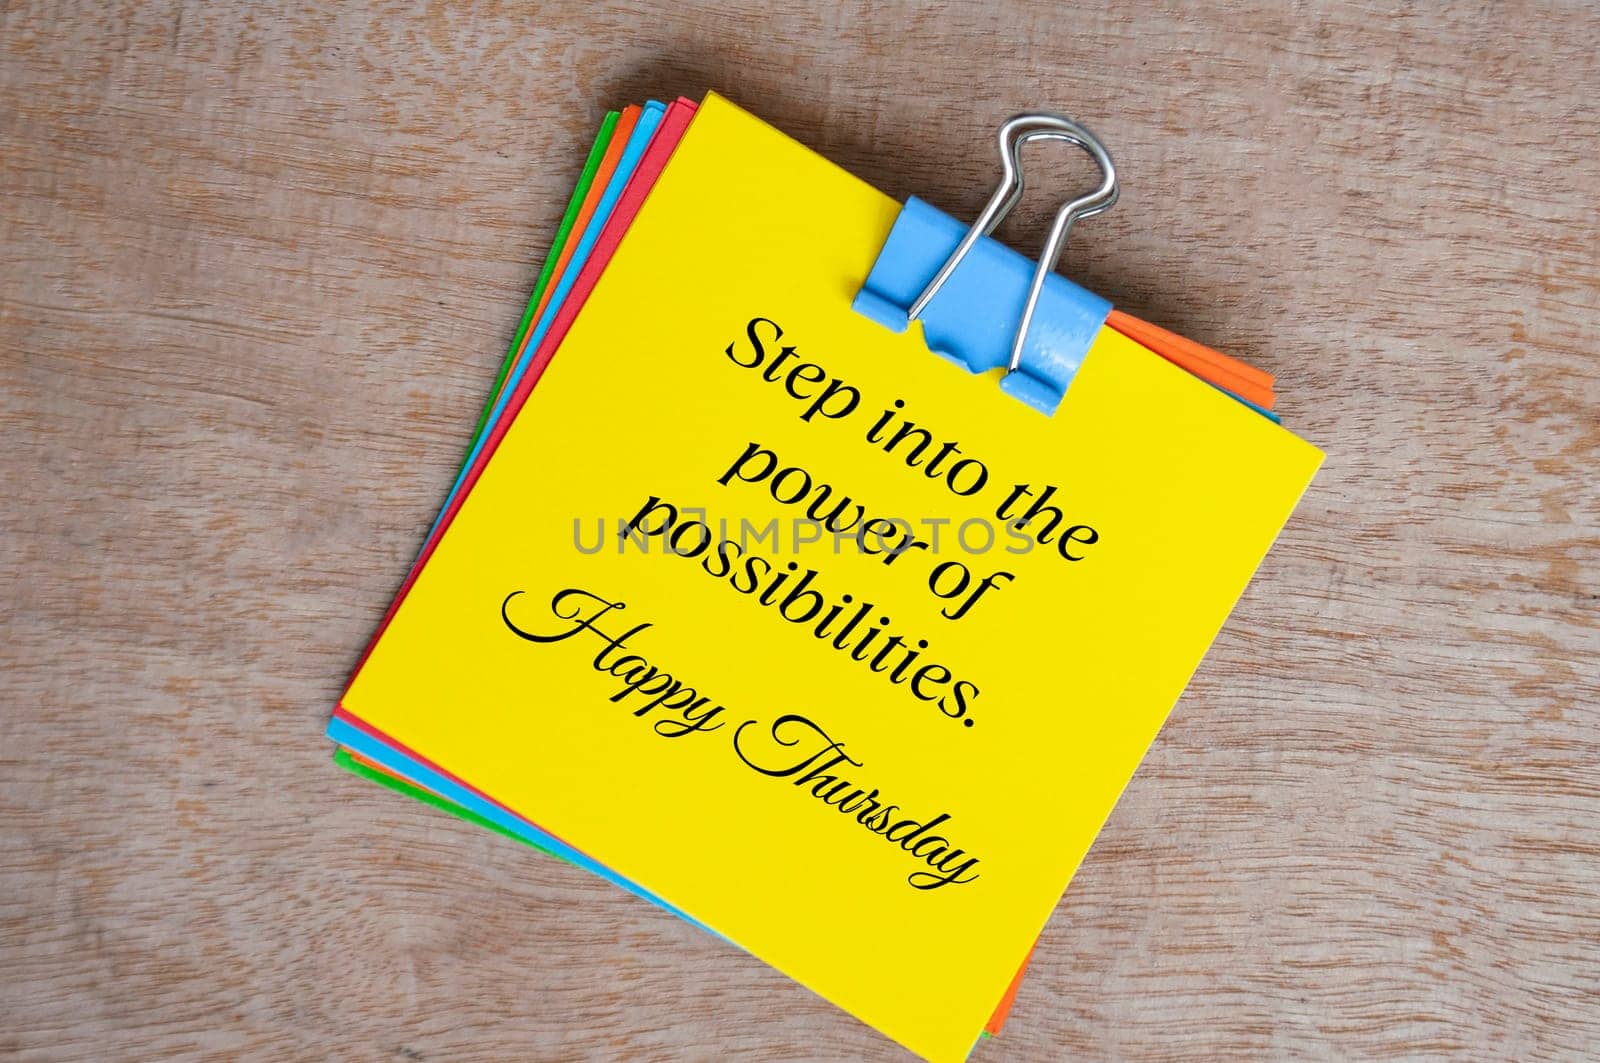 Happy Thursday greetings. Step into the power of possibilities.